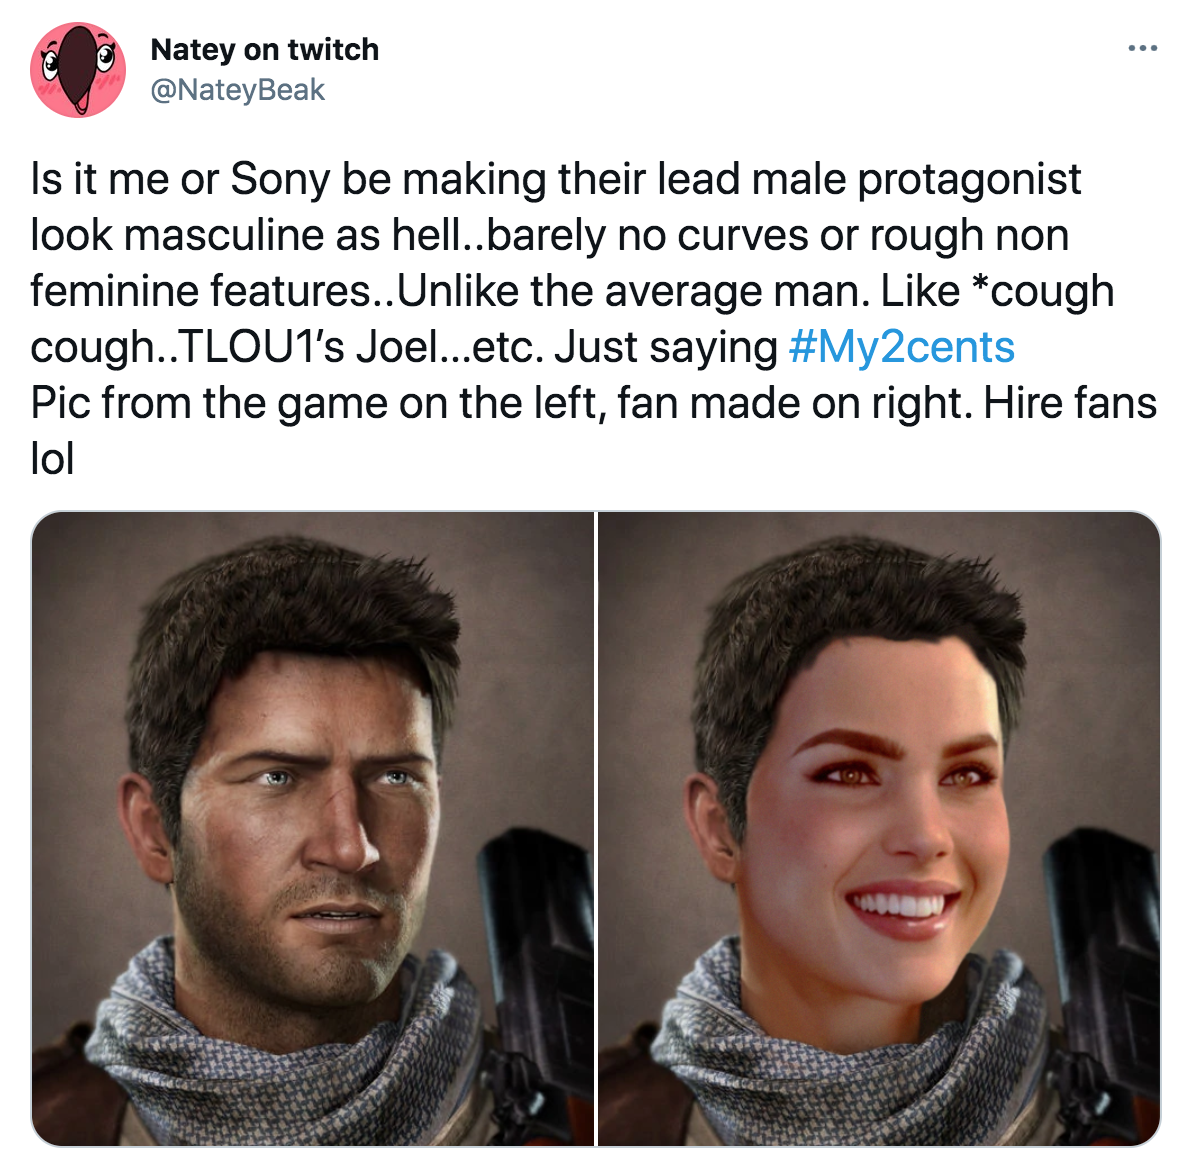 funny gaming memes - jaw - Natey on twitch Is it me or Sony be making their lead male protagonist look masculine as hell..barely no curves or rough non feminine features..Un the average man. cough cough..Tloui's Joel...etc. Just saying Pic from the game o